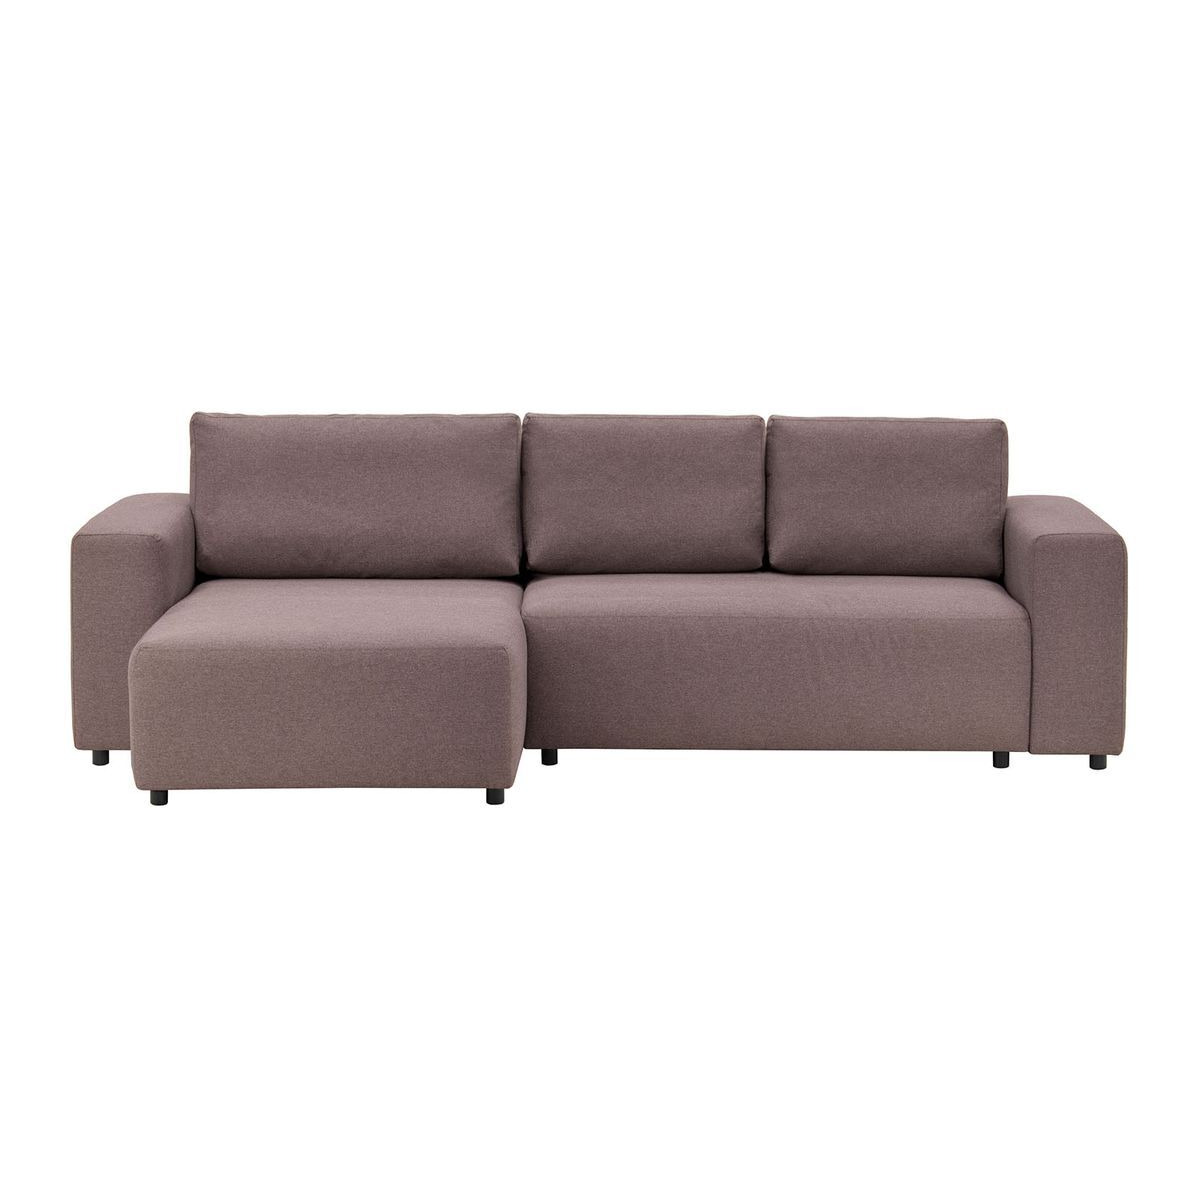 Solace Left Hand Corner Sofa Bed, lilac - image 1